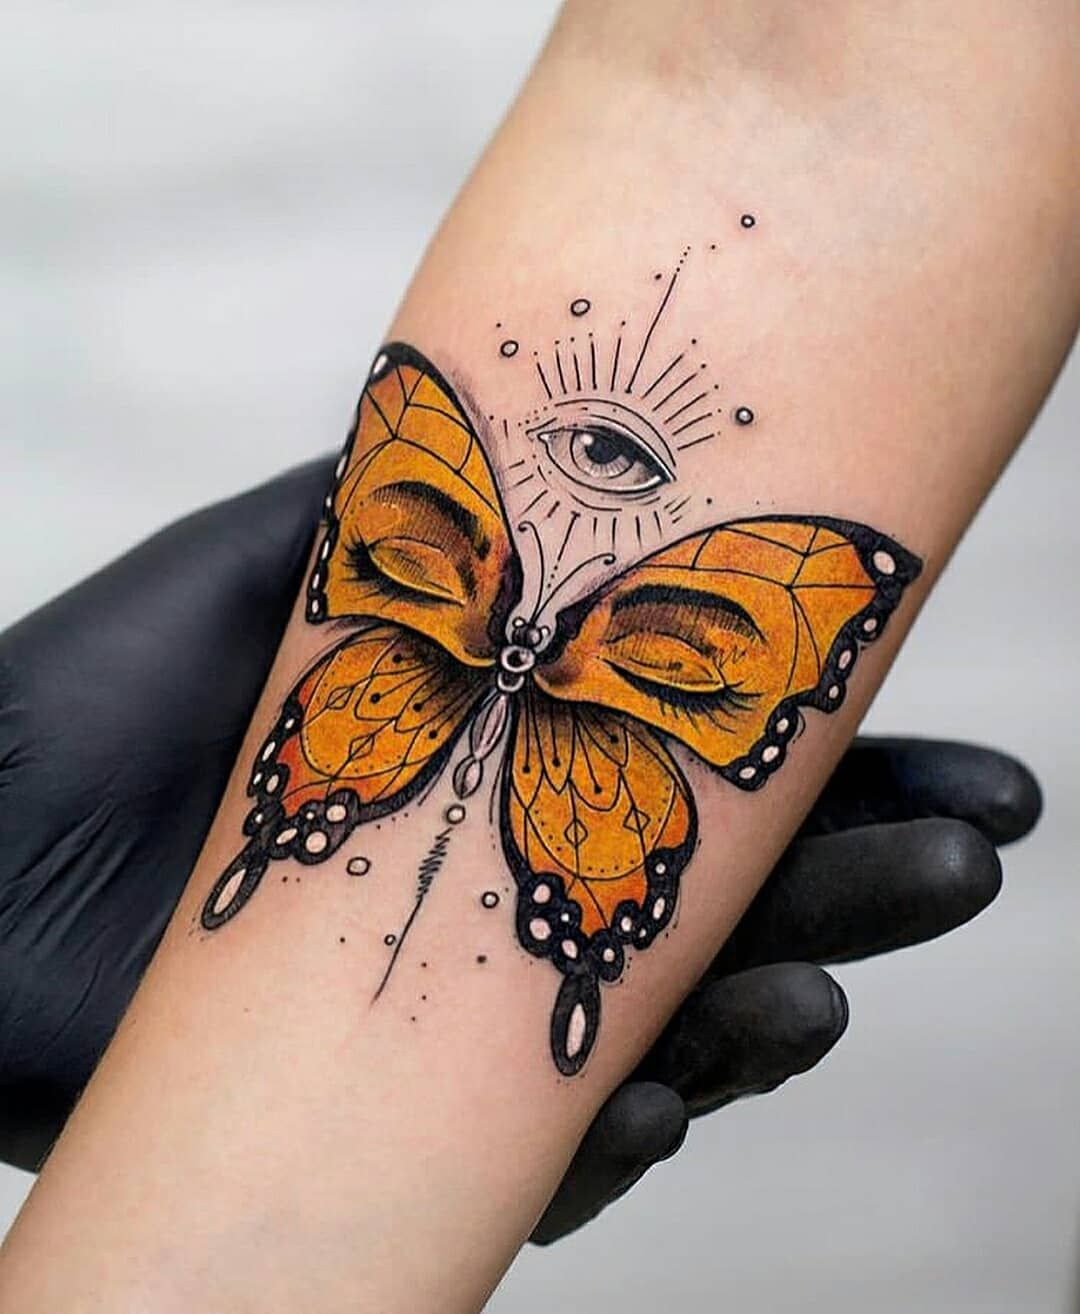 The Eyesfemale New Ink Tattoos Small Butterfly Tattoo Tattoo for dimensions 1080 X 1314